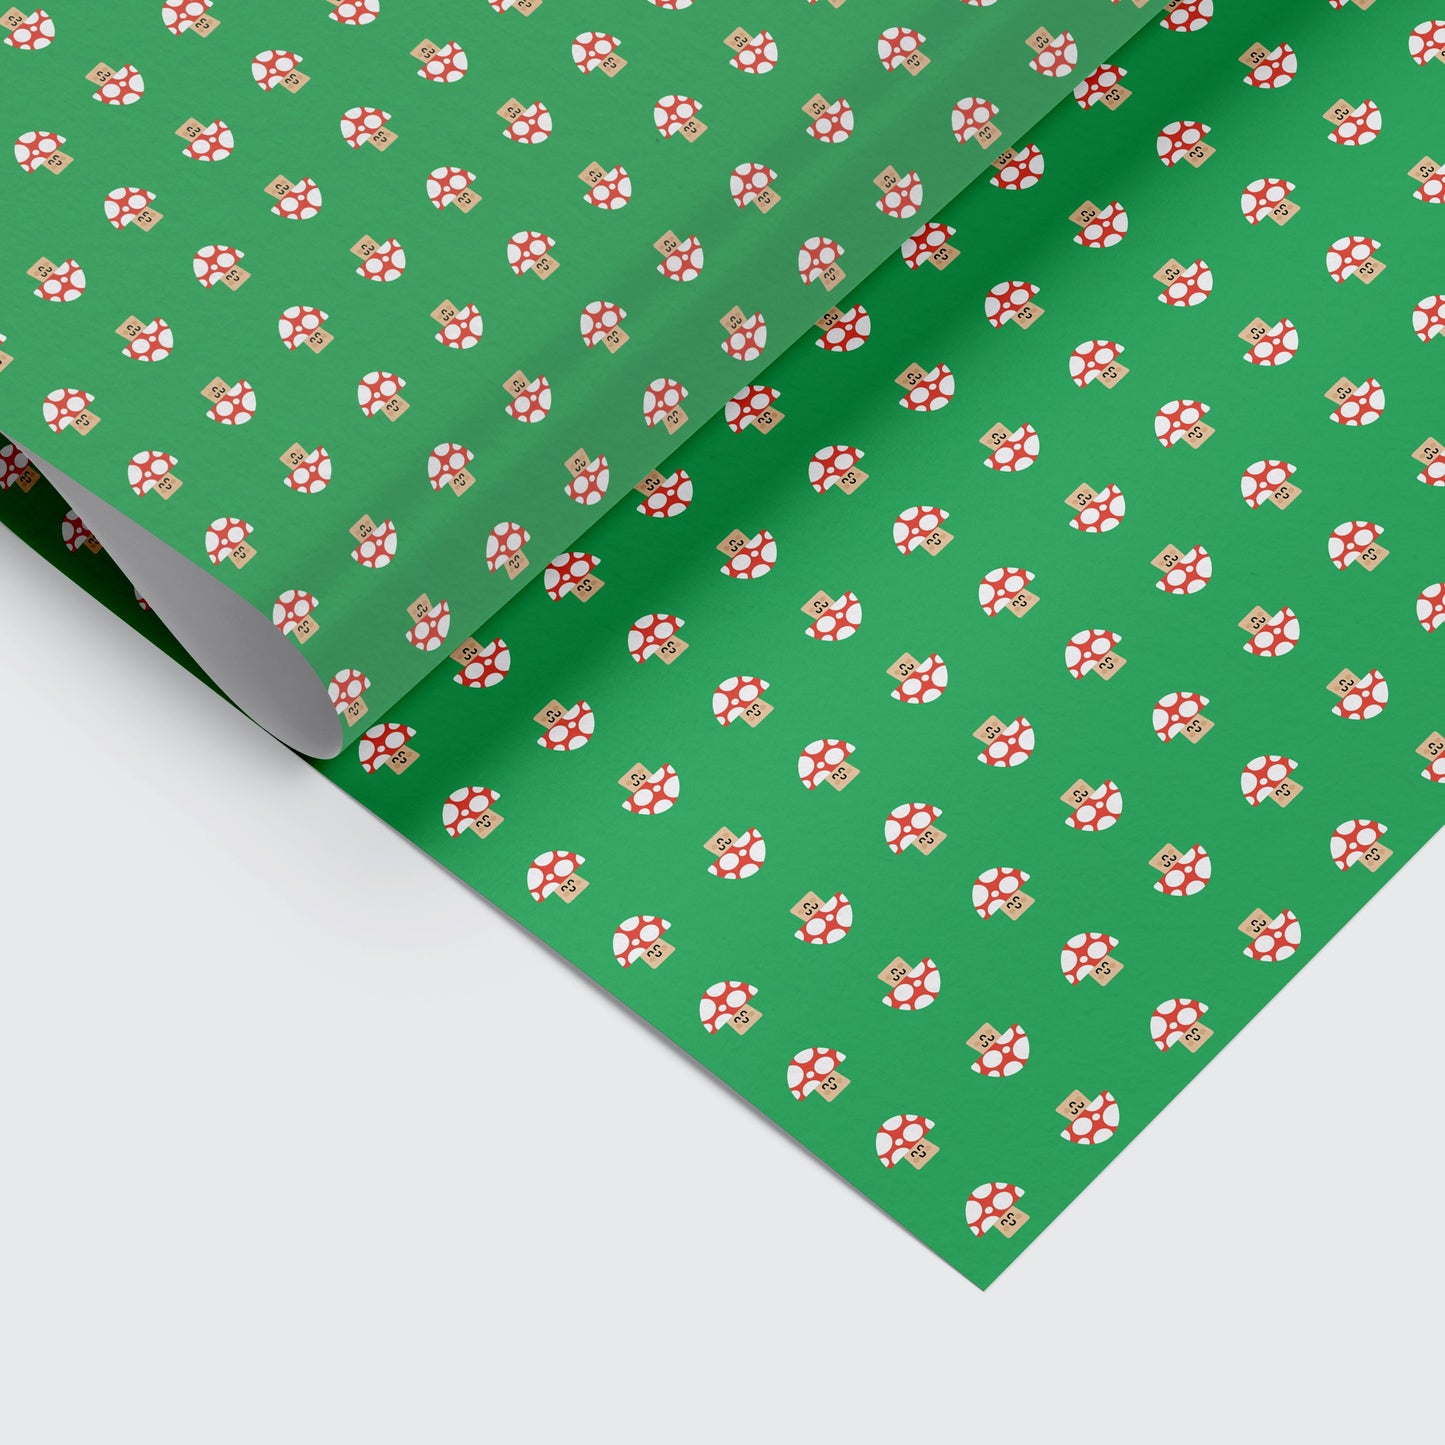 wrapping paper with mushroom pattern on it